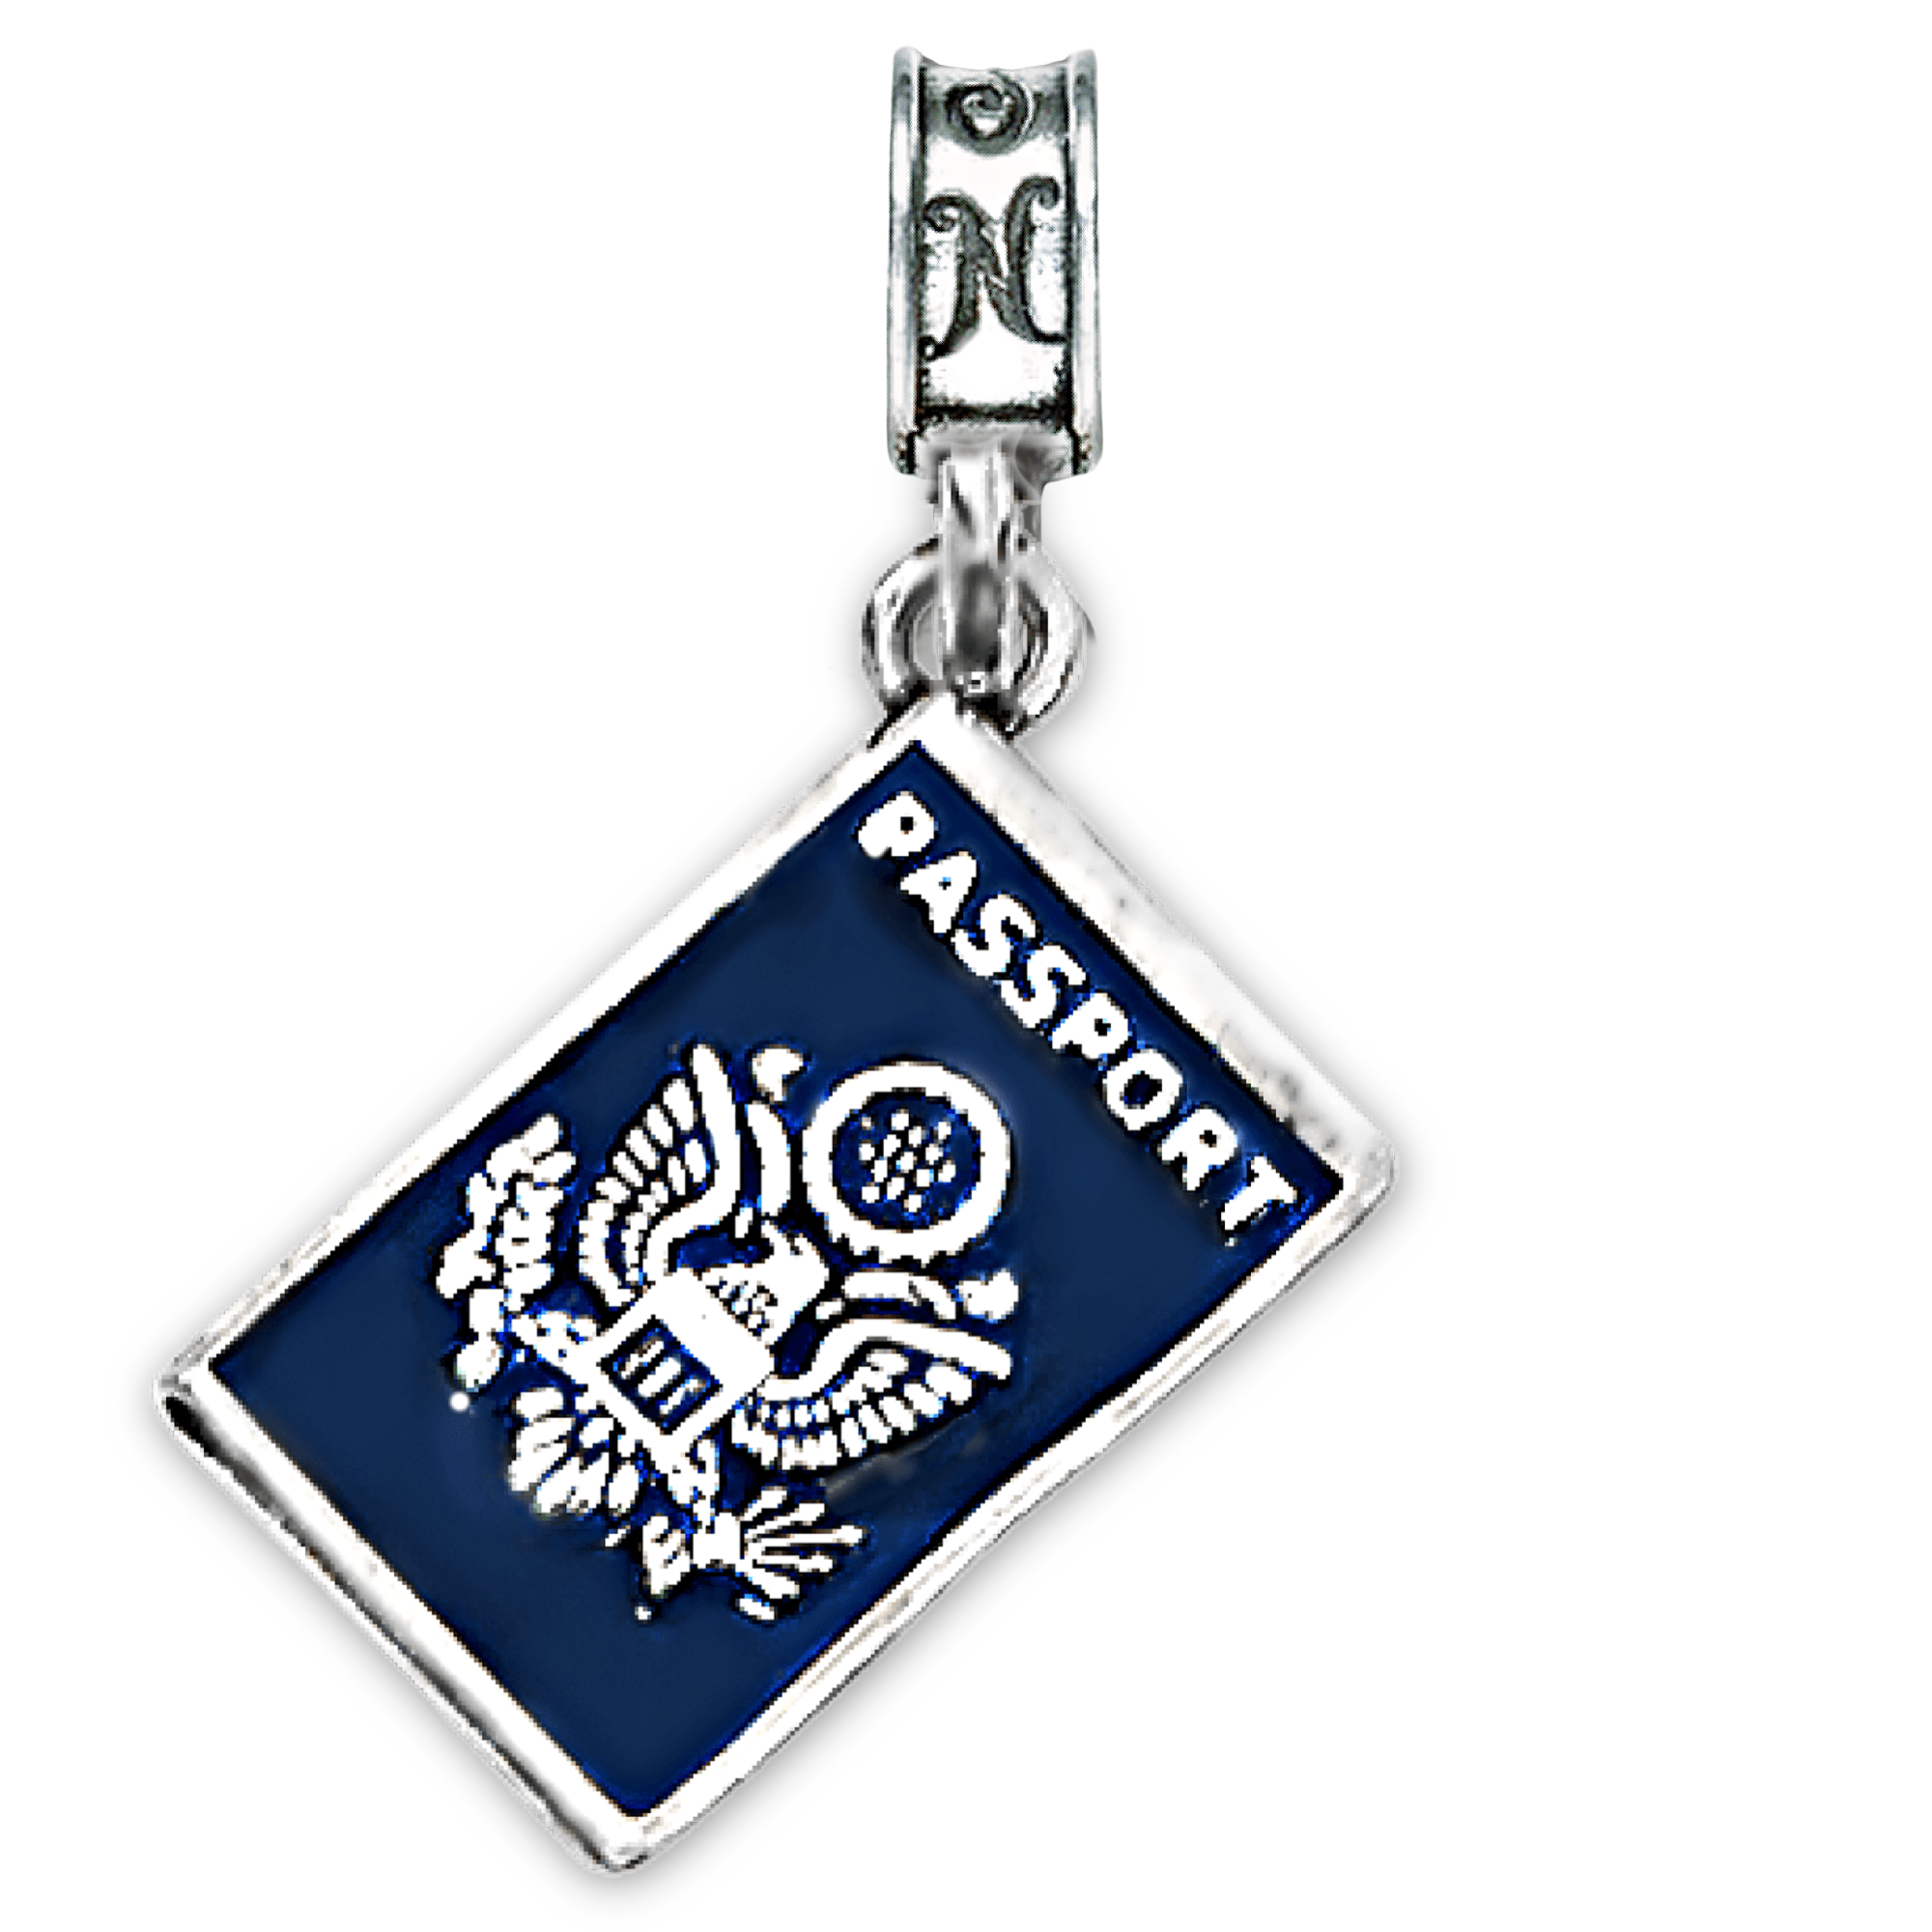 Military Jewelry, Military Charms, Military Gifts, Travel Charms, Passport Charm